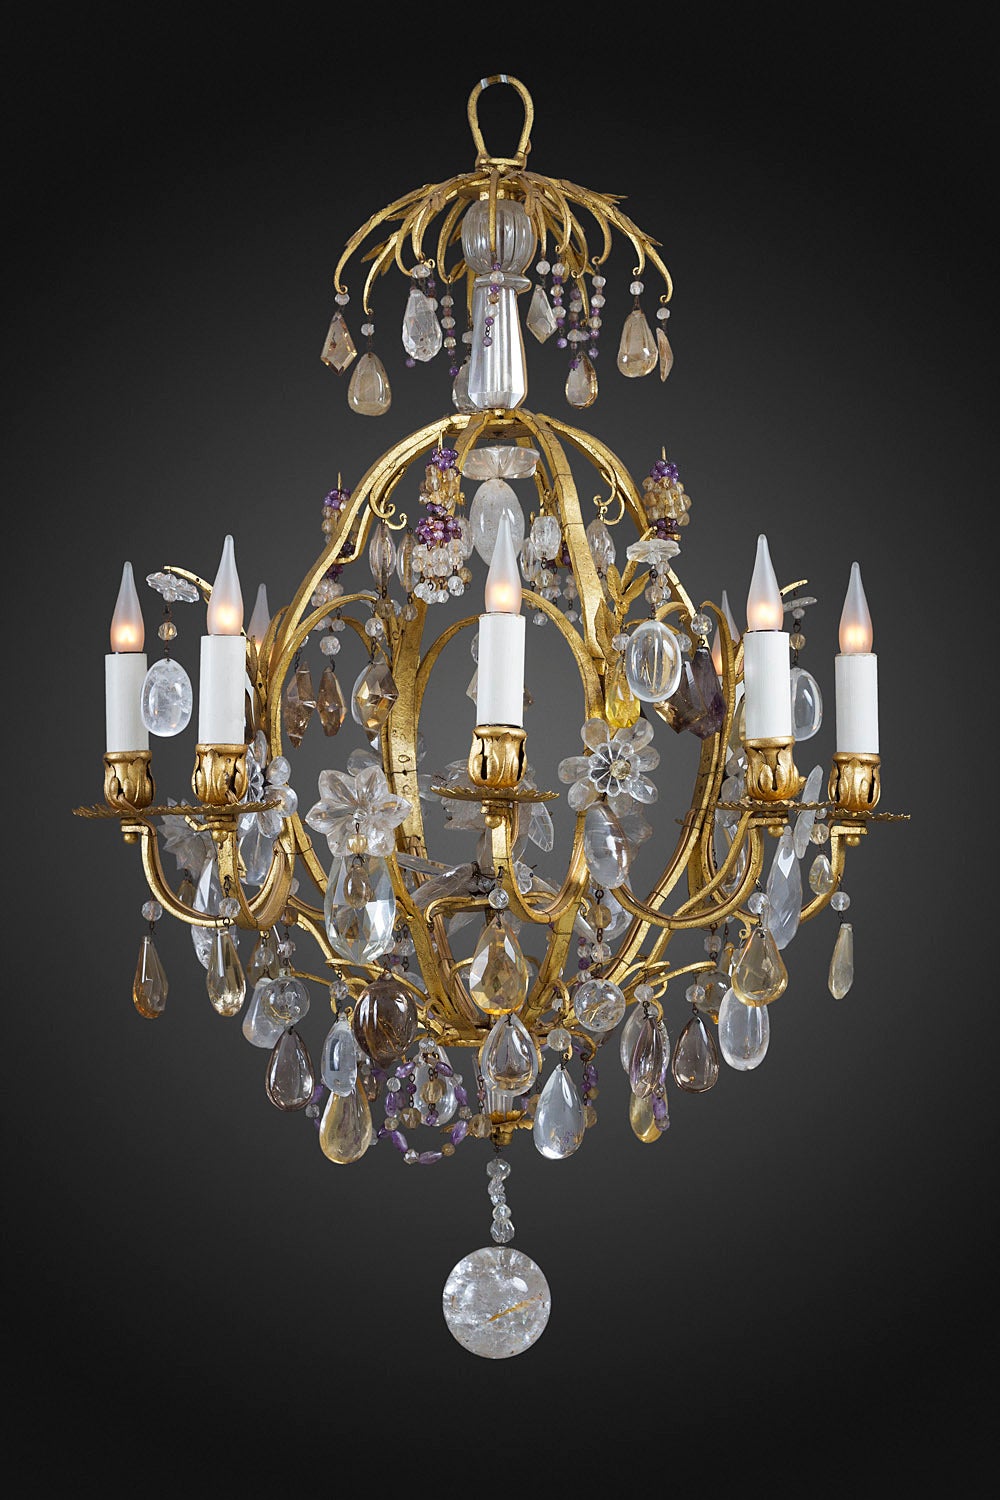 Cage frame chandelier in wrought iron with gilt patina
Italy circa 1930-40
Exceptional quality of crystals : rock crystal and colored crystal
8 lights